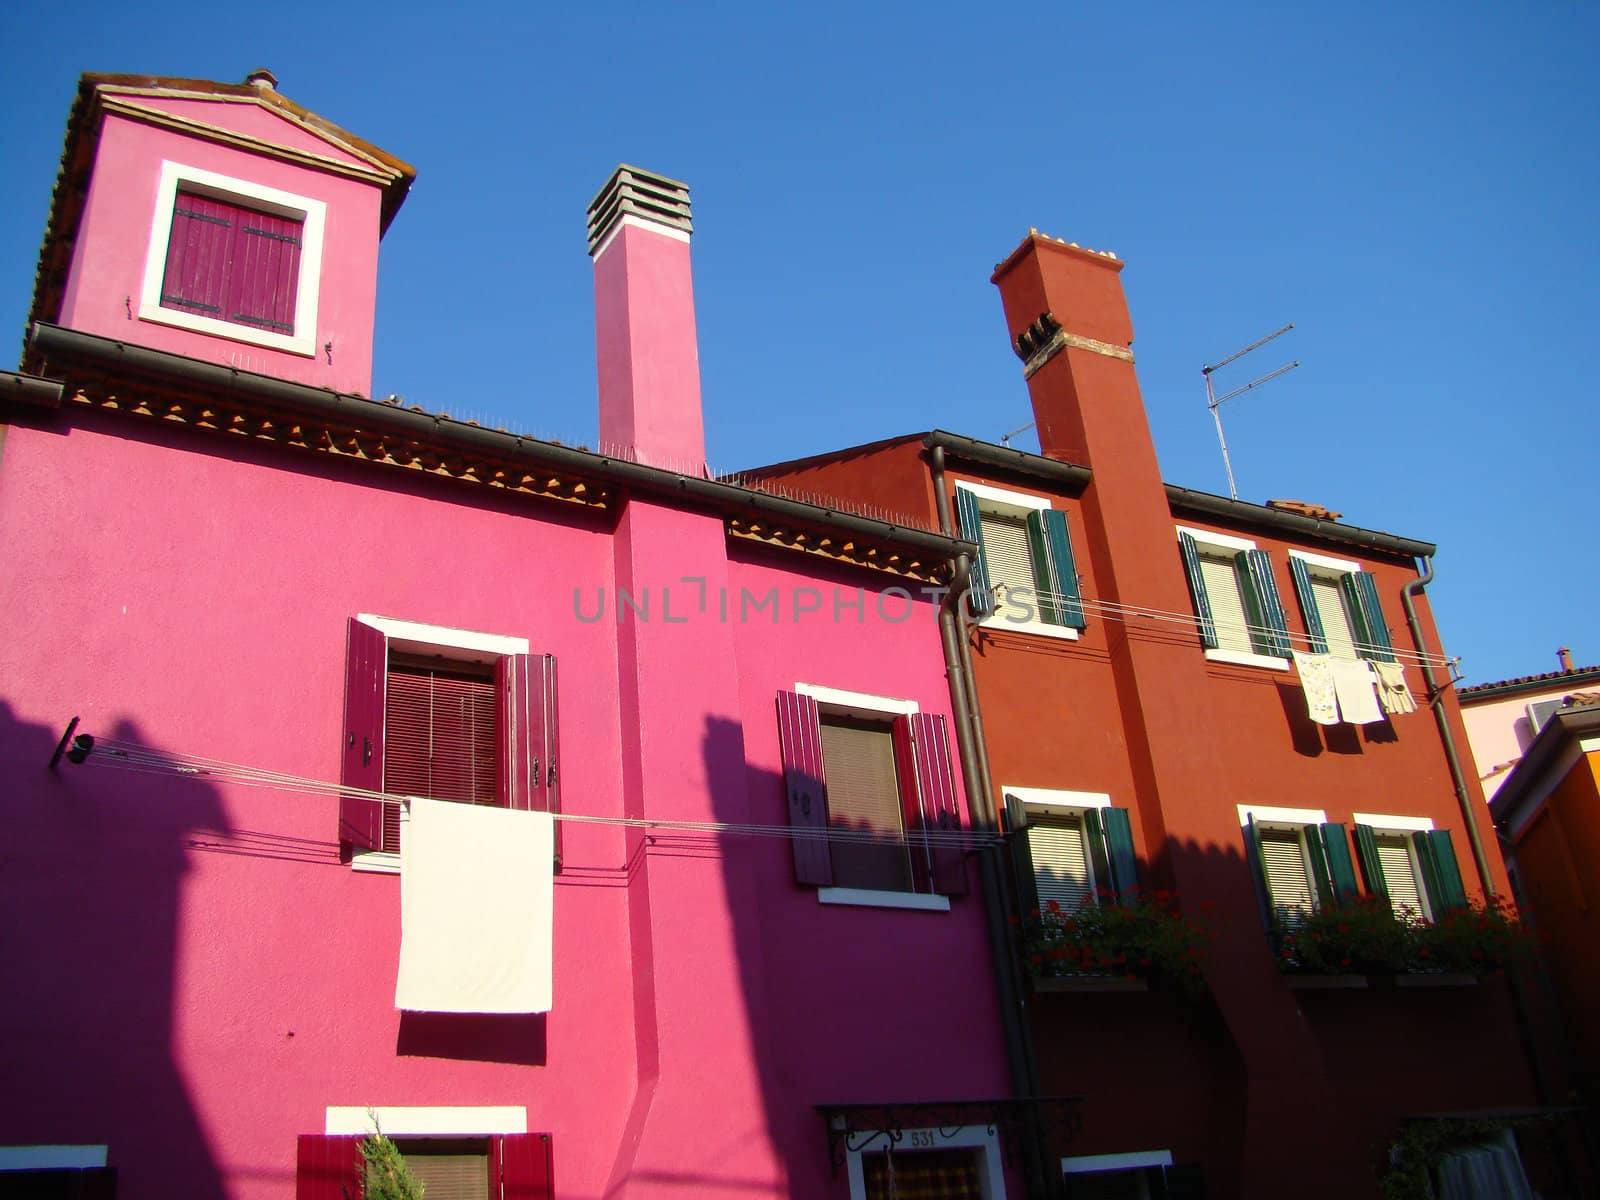 traditional colourful houses on Burano island one of the venetian lagoon. Venice Italy